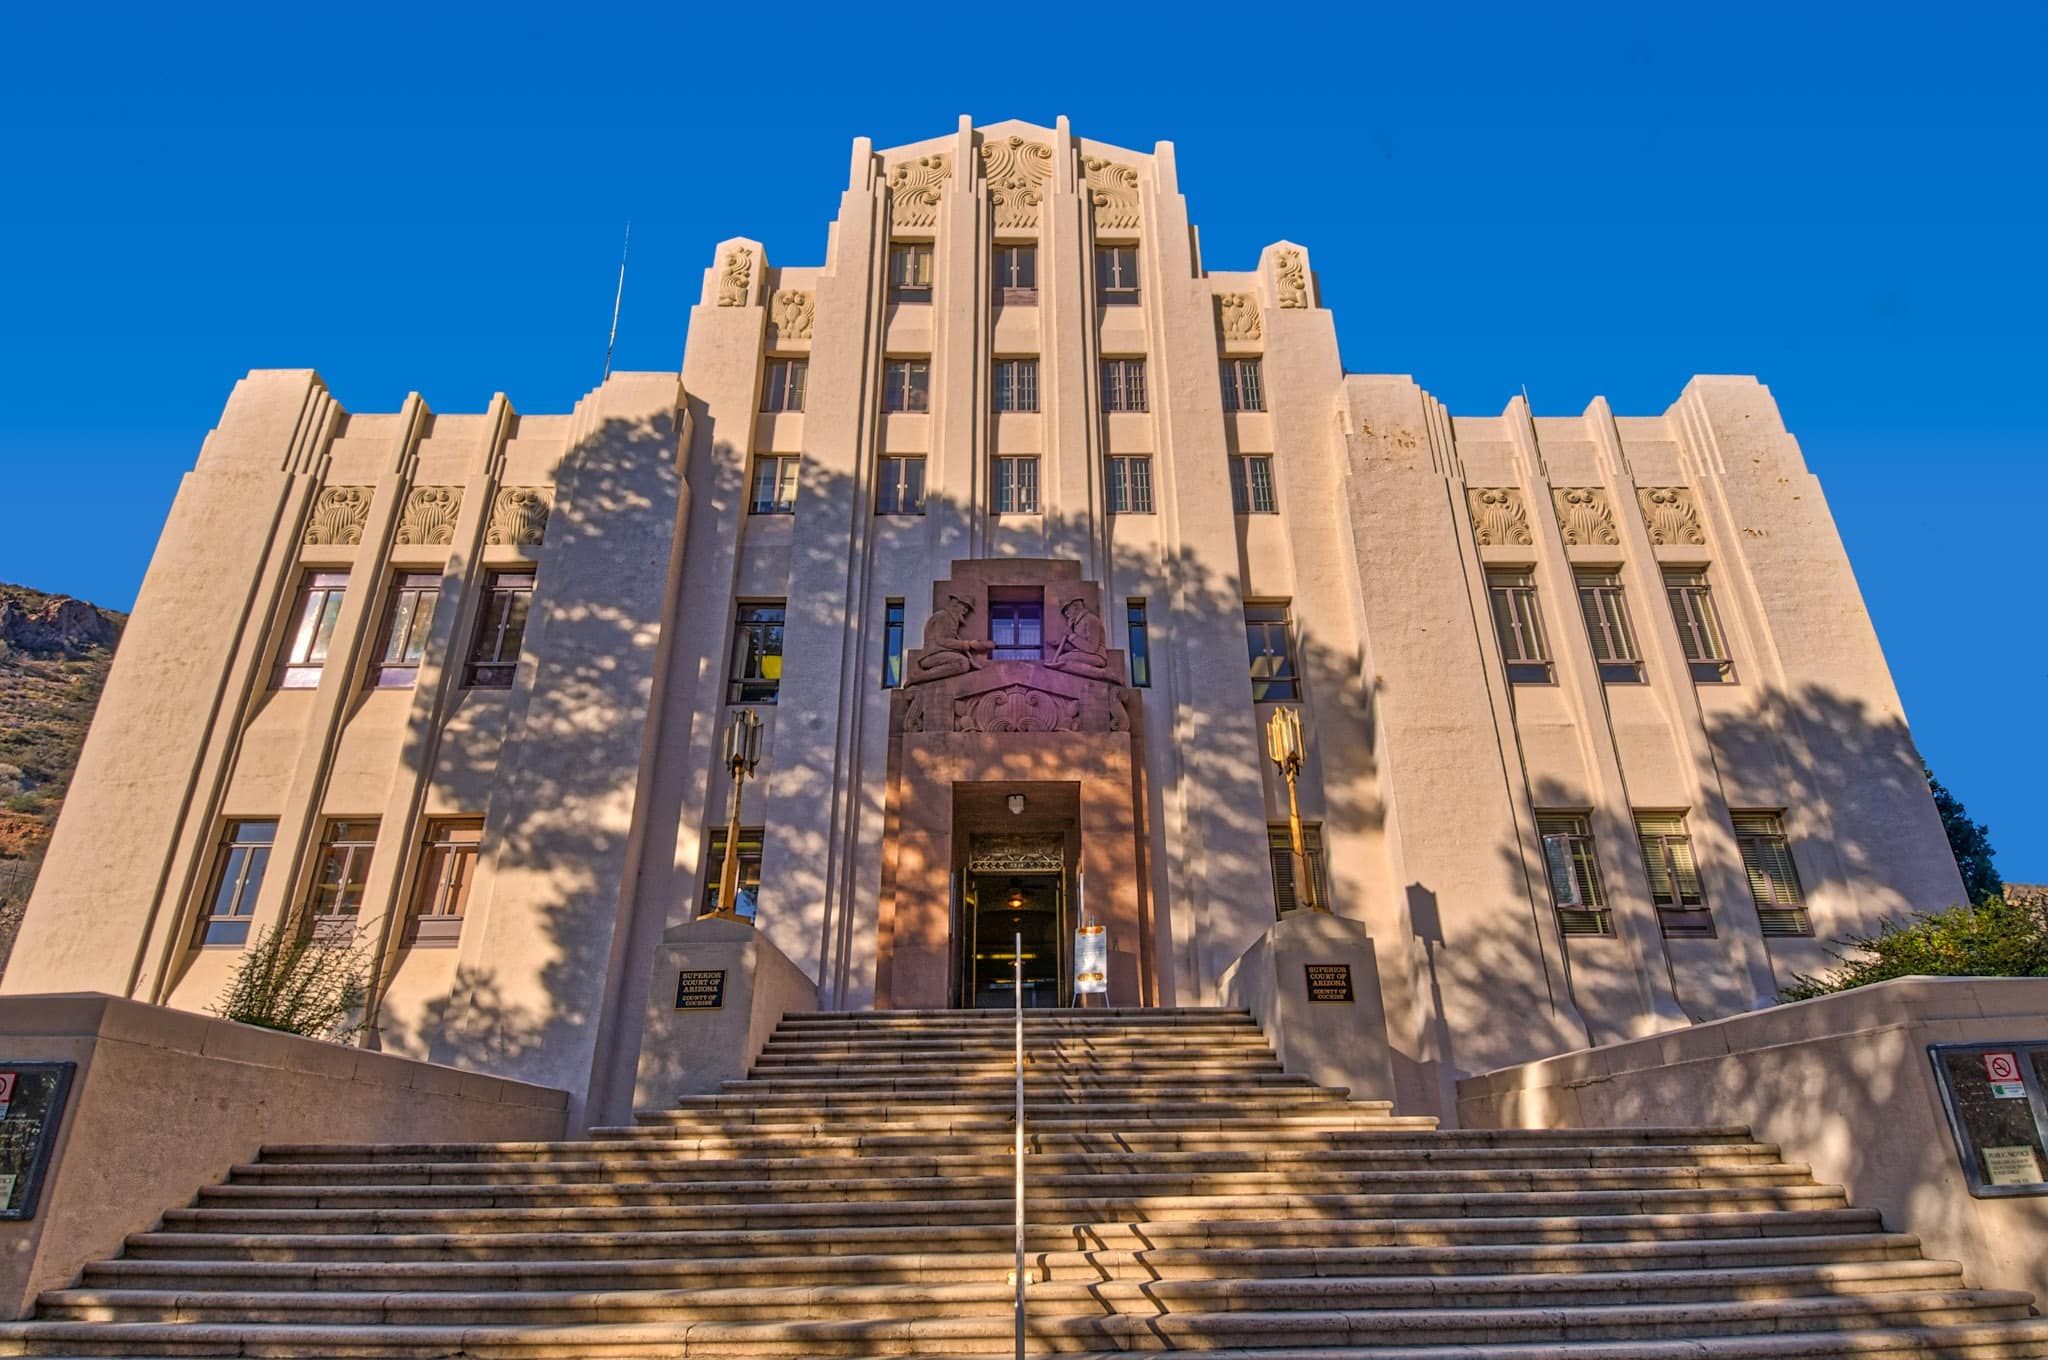 This view of the Cochise County Courthouse in Bisbee, Arizona, features the grand staircase leading up to the Art Deco entrance to this public building designed by Tucson architect Roy Place.